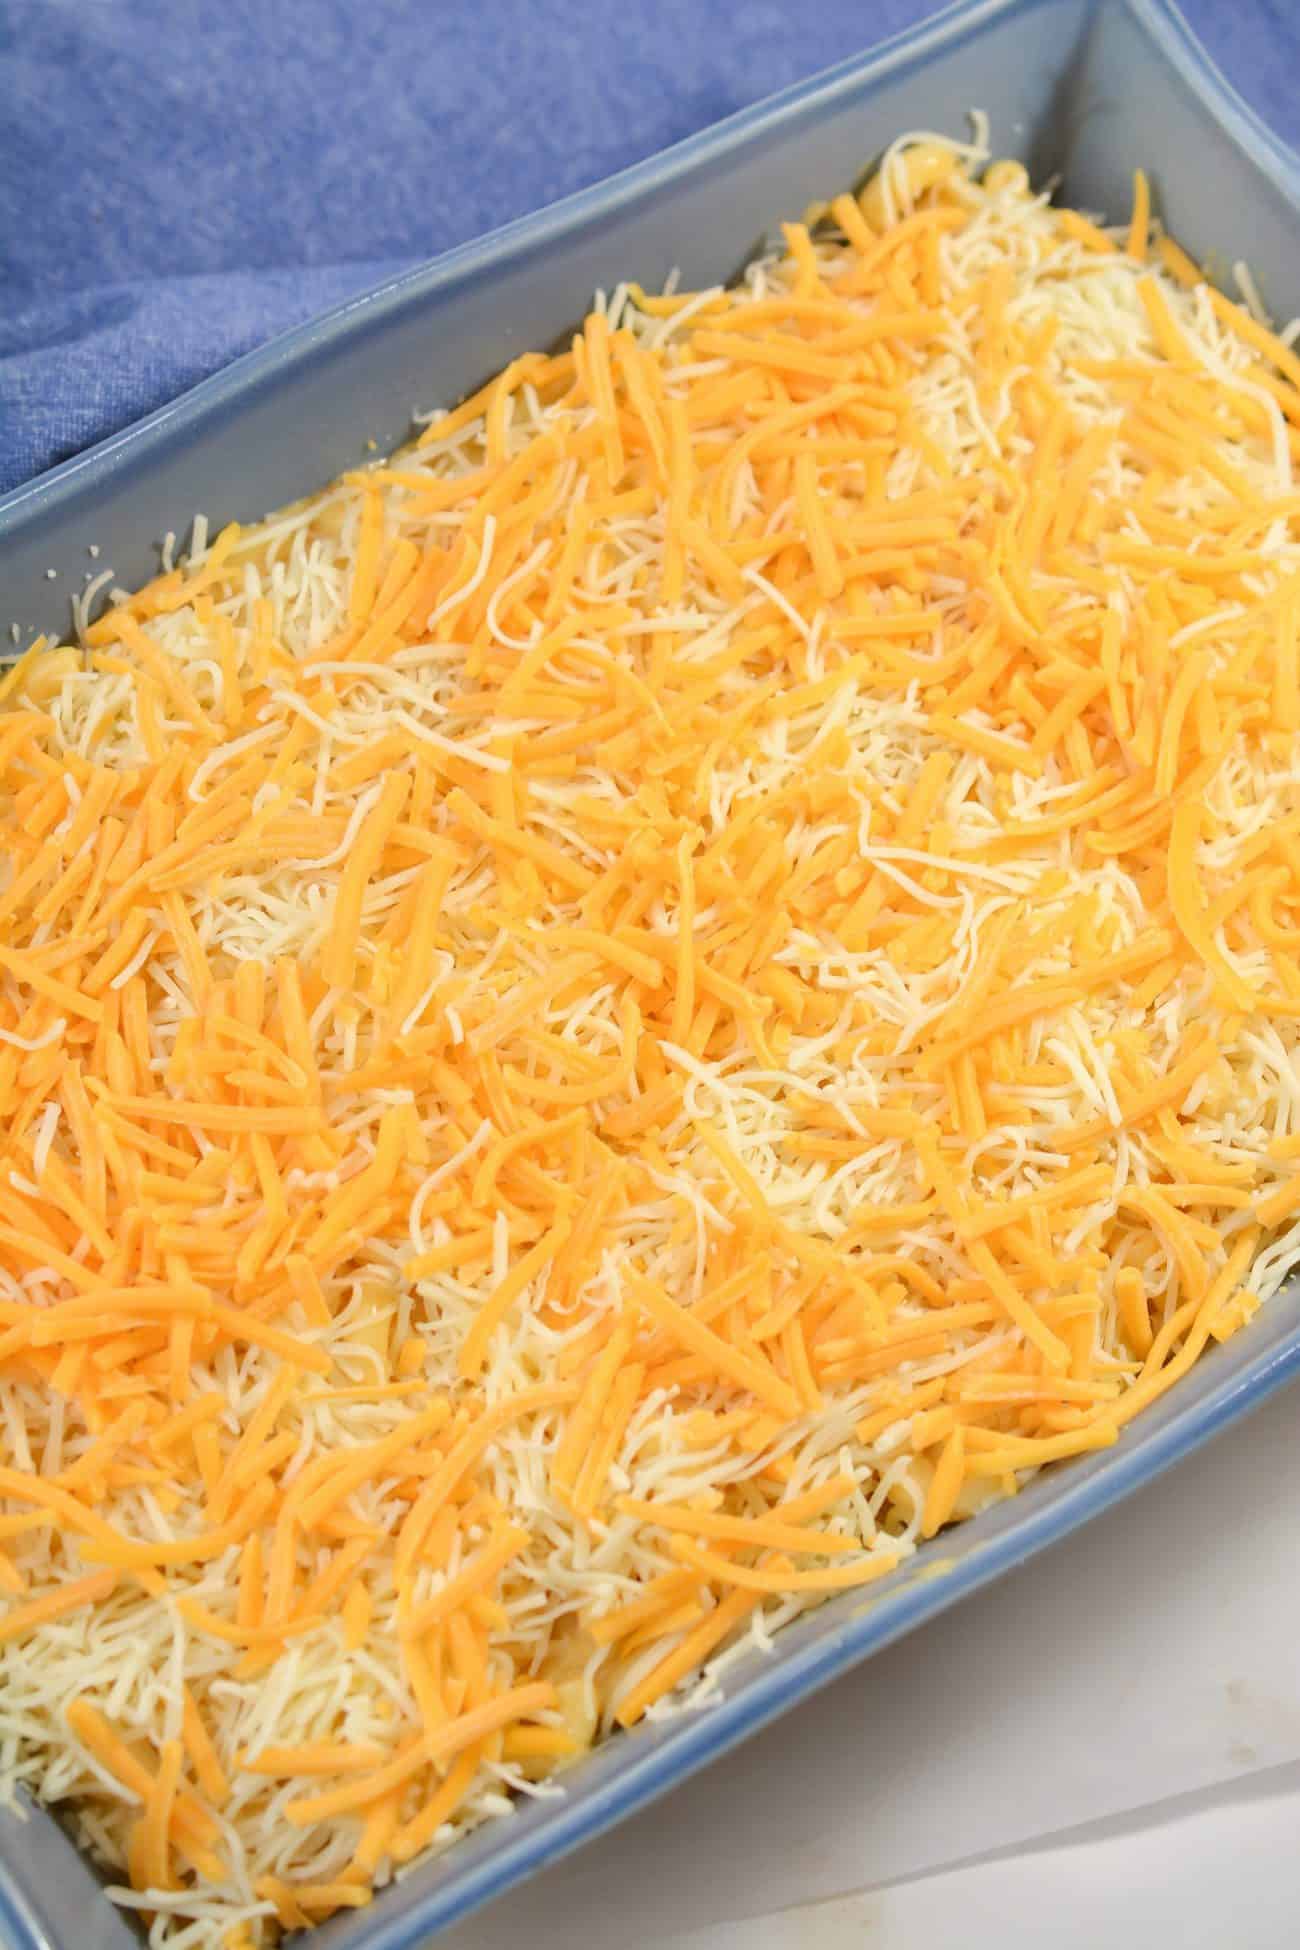 Pour the mixture into a well-greased 9x13 baking dish and top with the remaining 1 cup of each of the shredded cheeses.